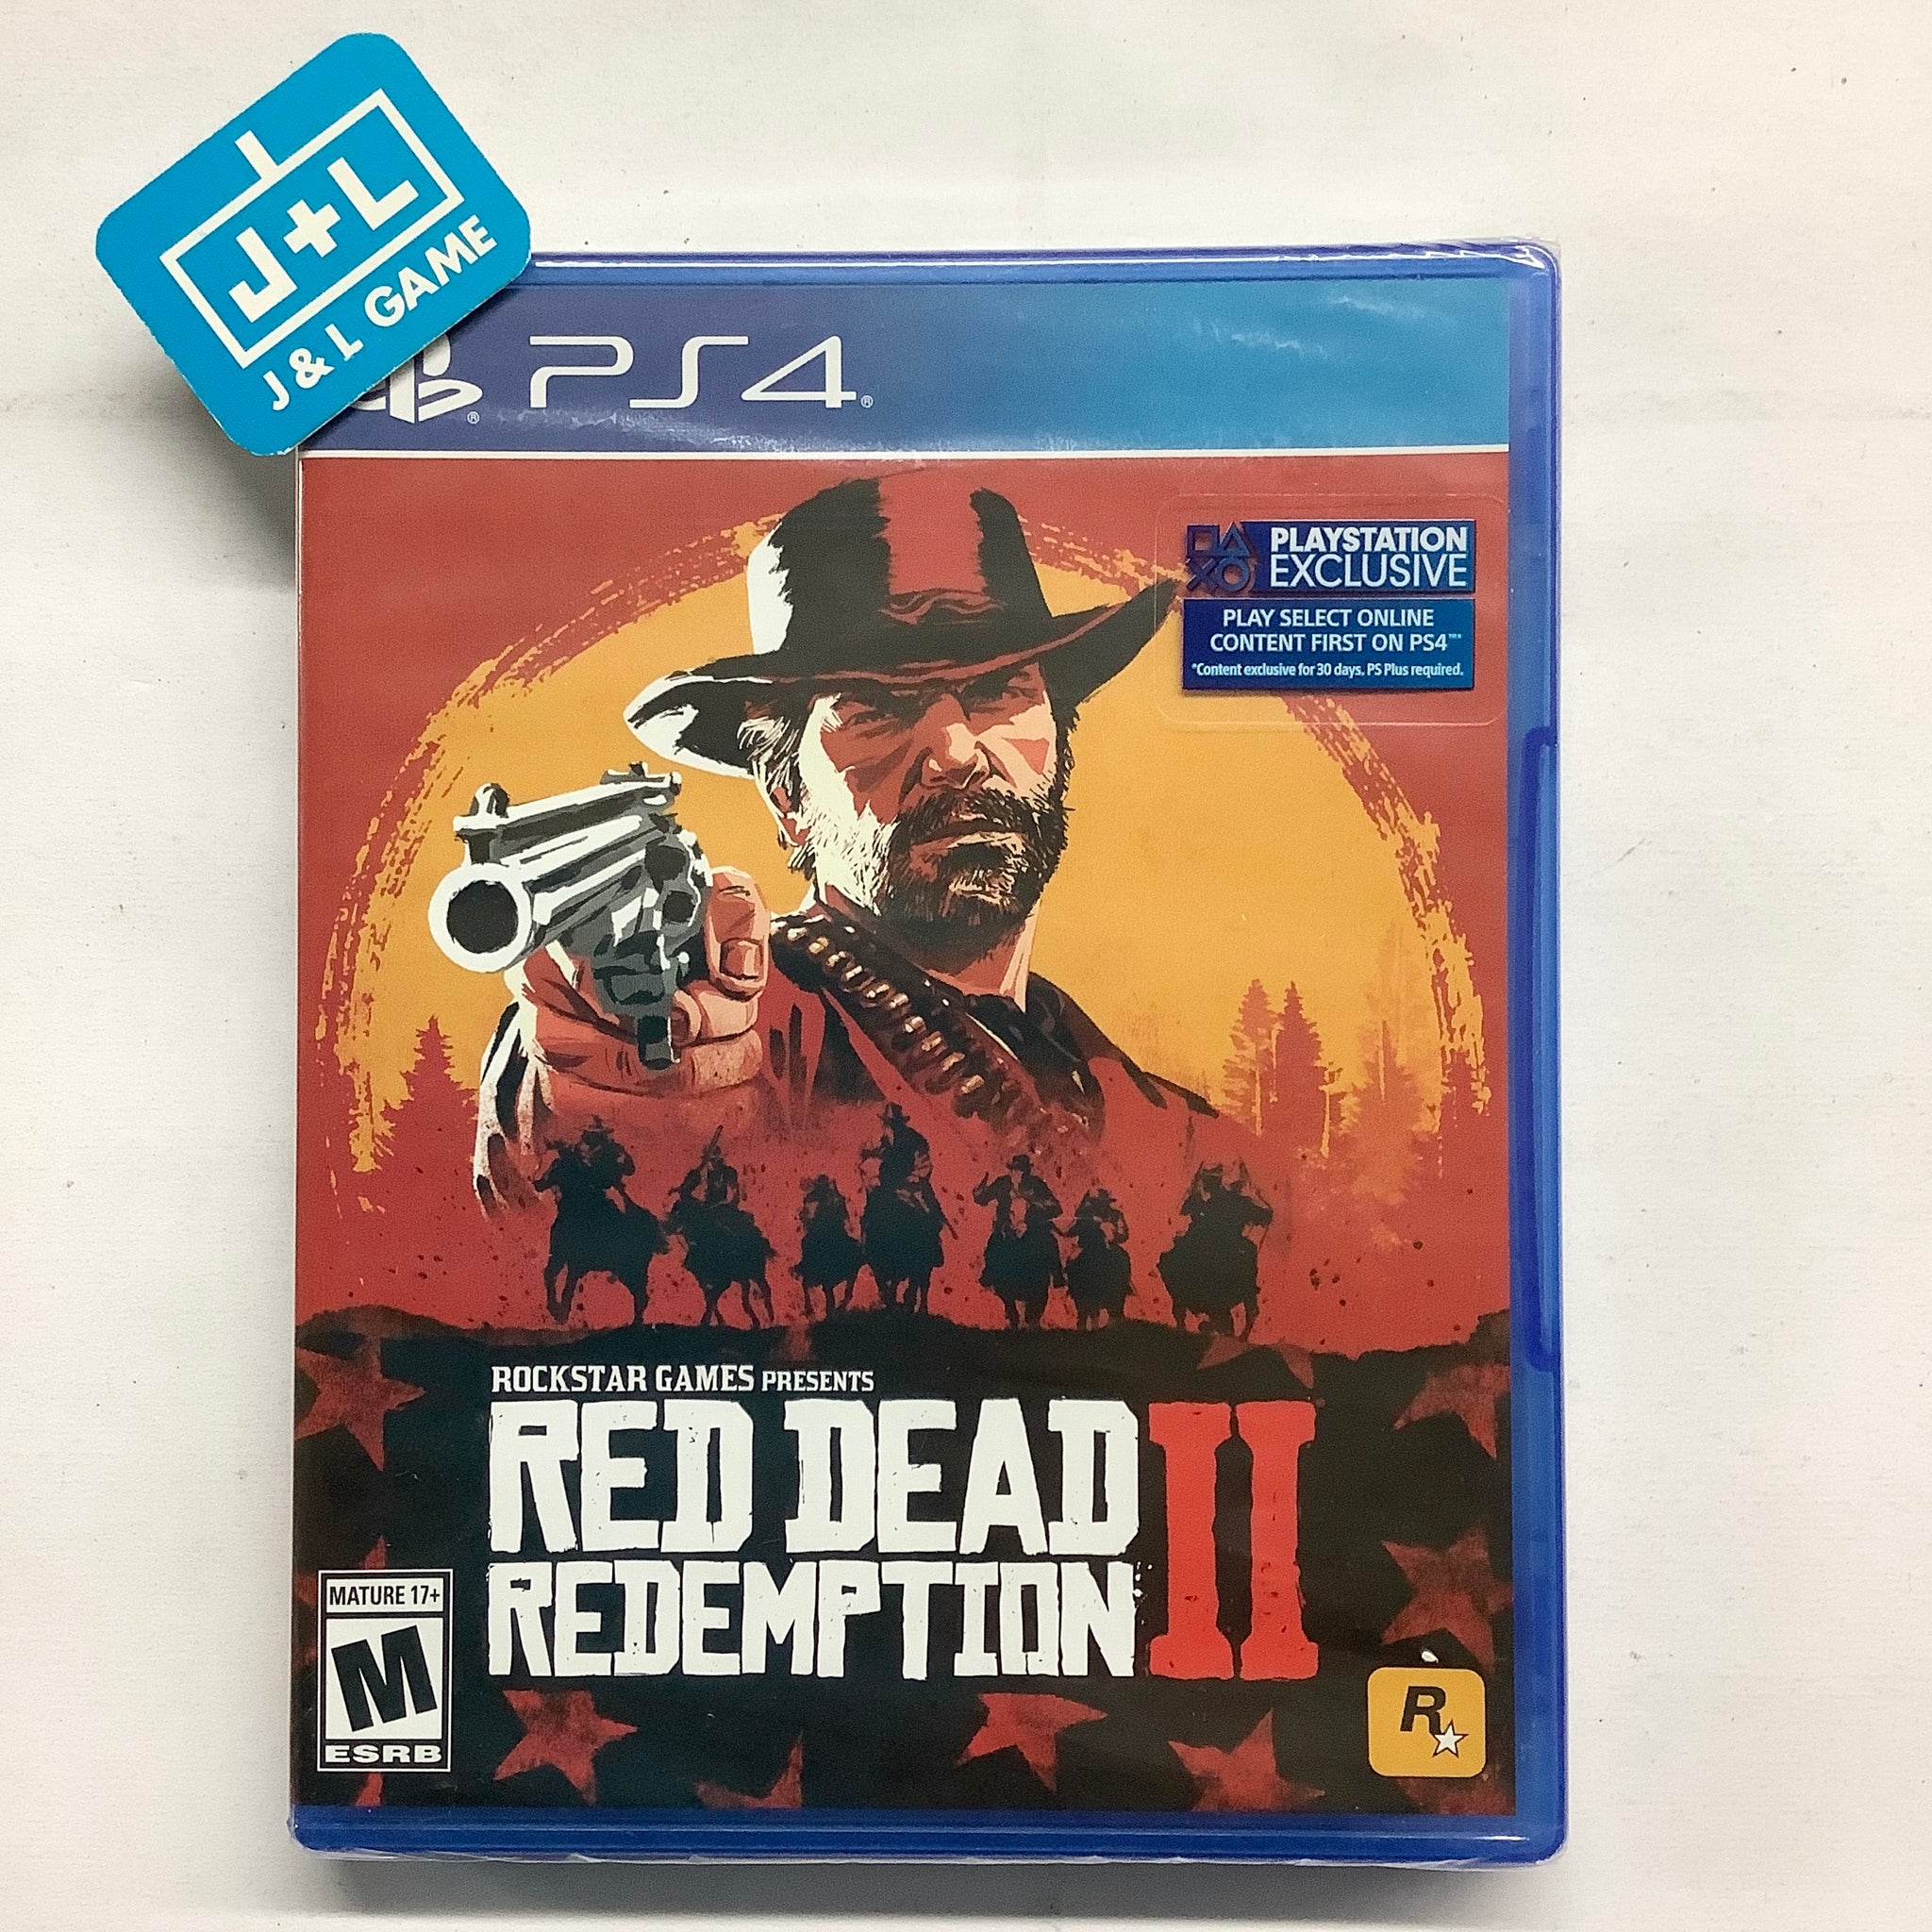 Red Dead Redemption 2 - Playstation 4 (PS4) [video game]